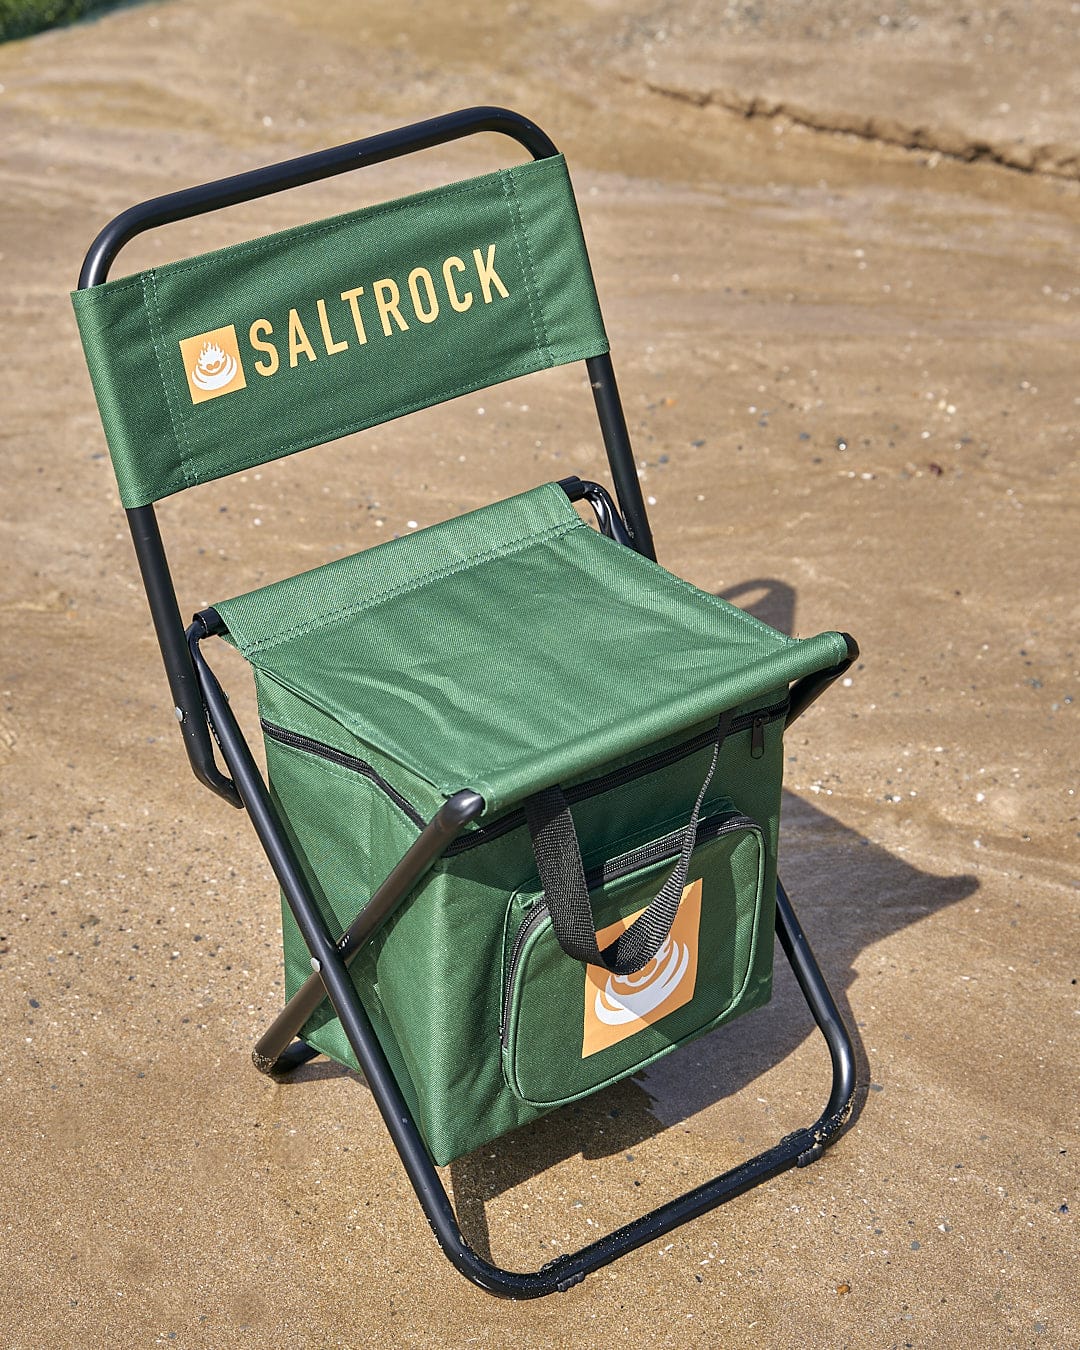 Spectator - Foldable Chair with Cooler Bag - Dark Green